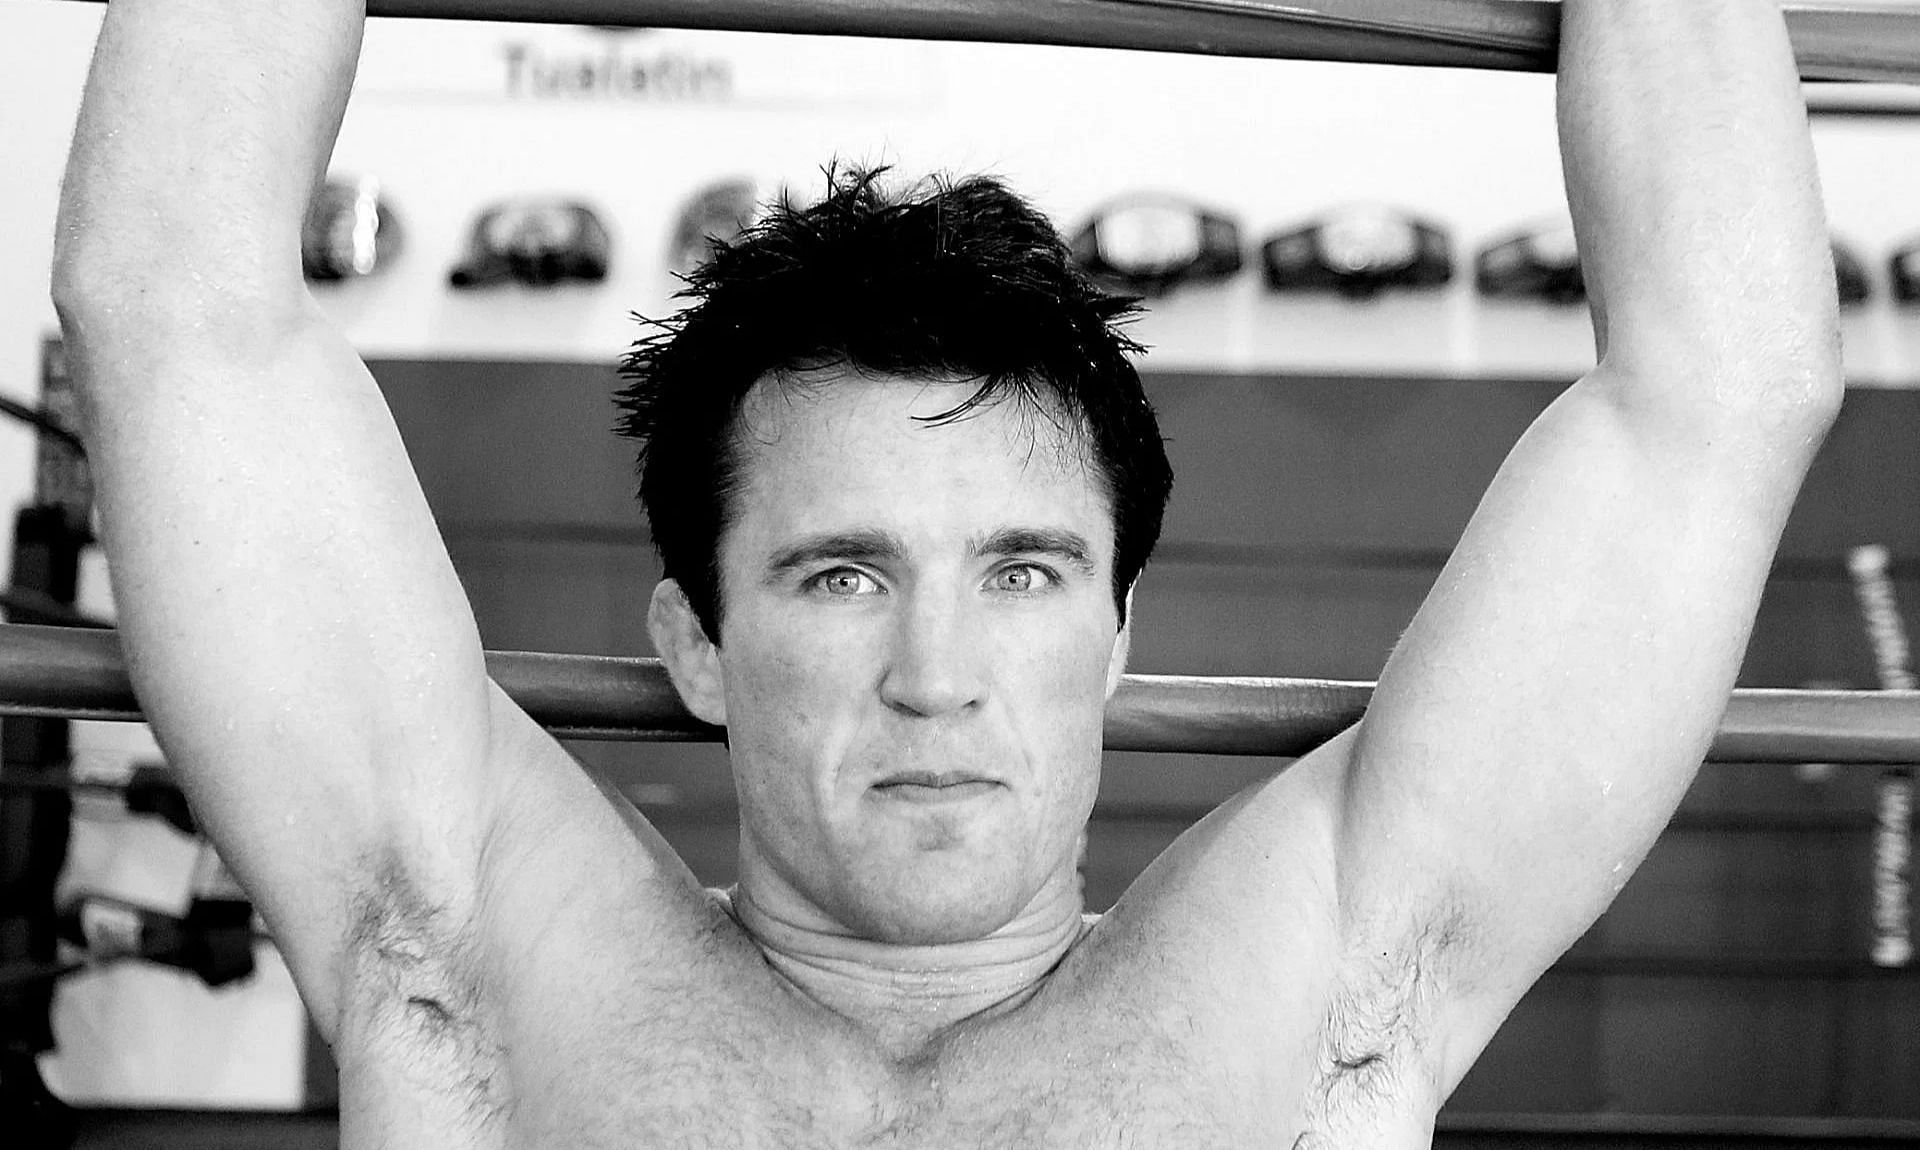 Two-time title challenger Chael Sonnen [Image courtesy of Getty]